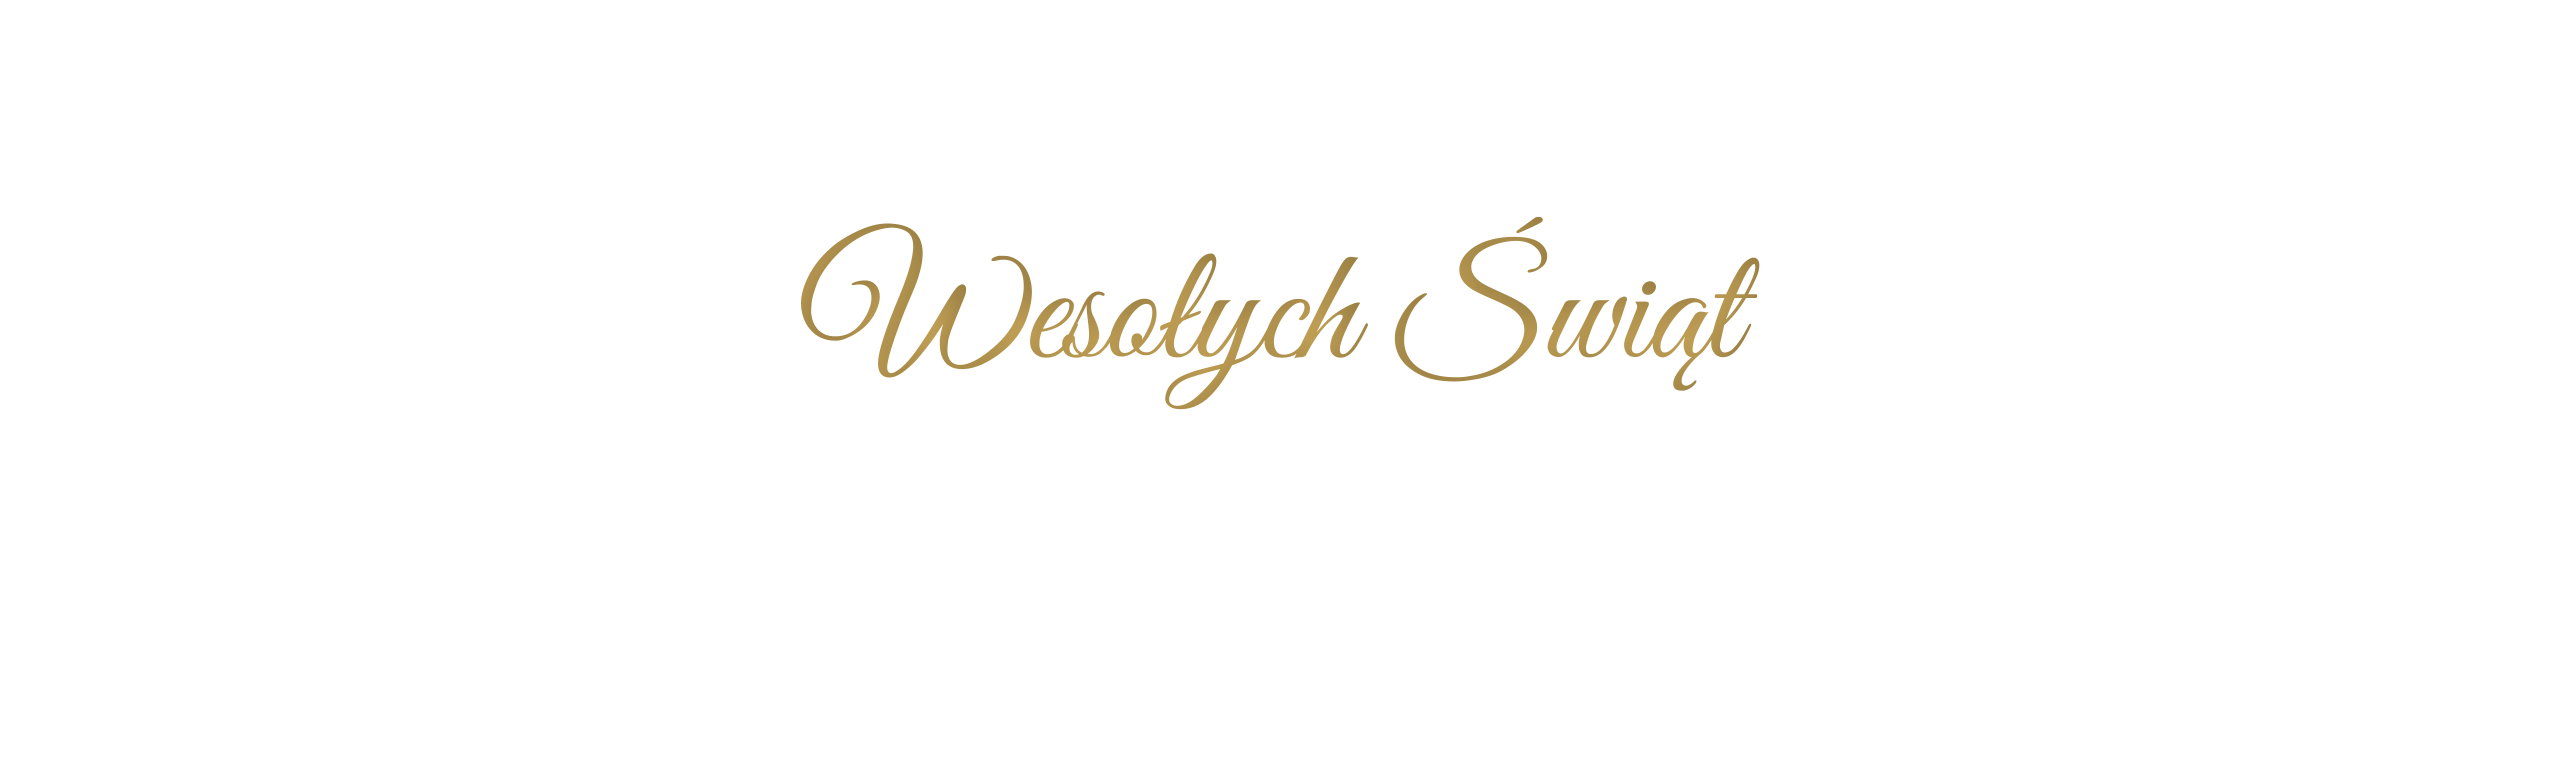 wesolych.png